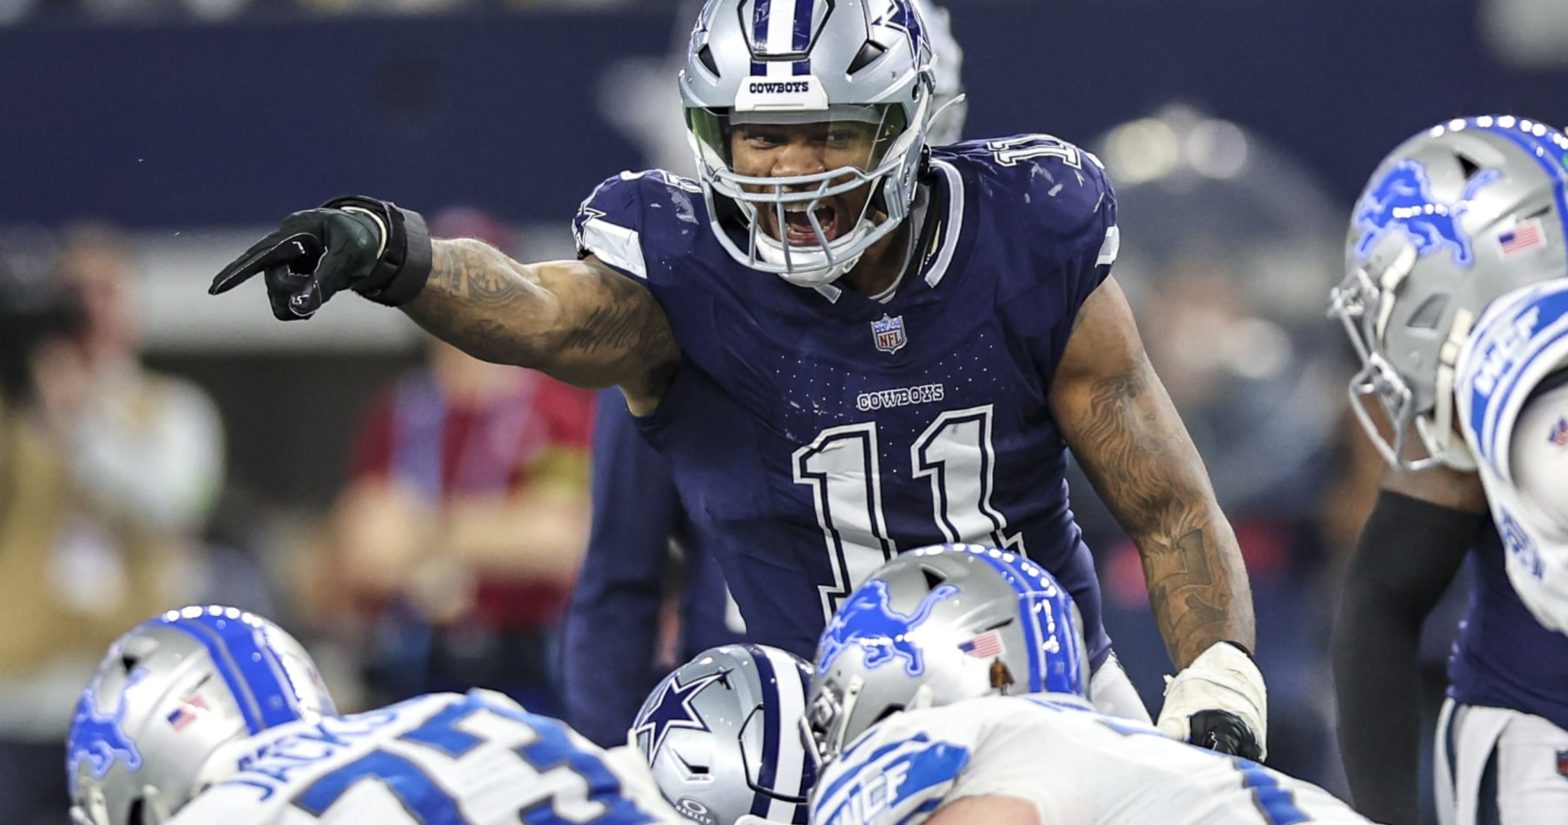 Cowboys Rumors: Micah Parsons’ Contract Option Picked Up as DE, Not LB; Saves $2.7M